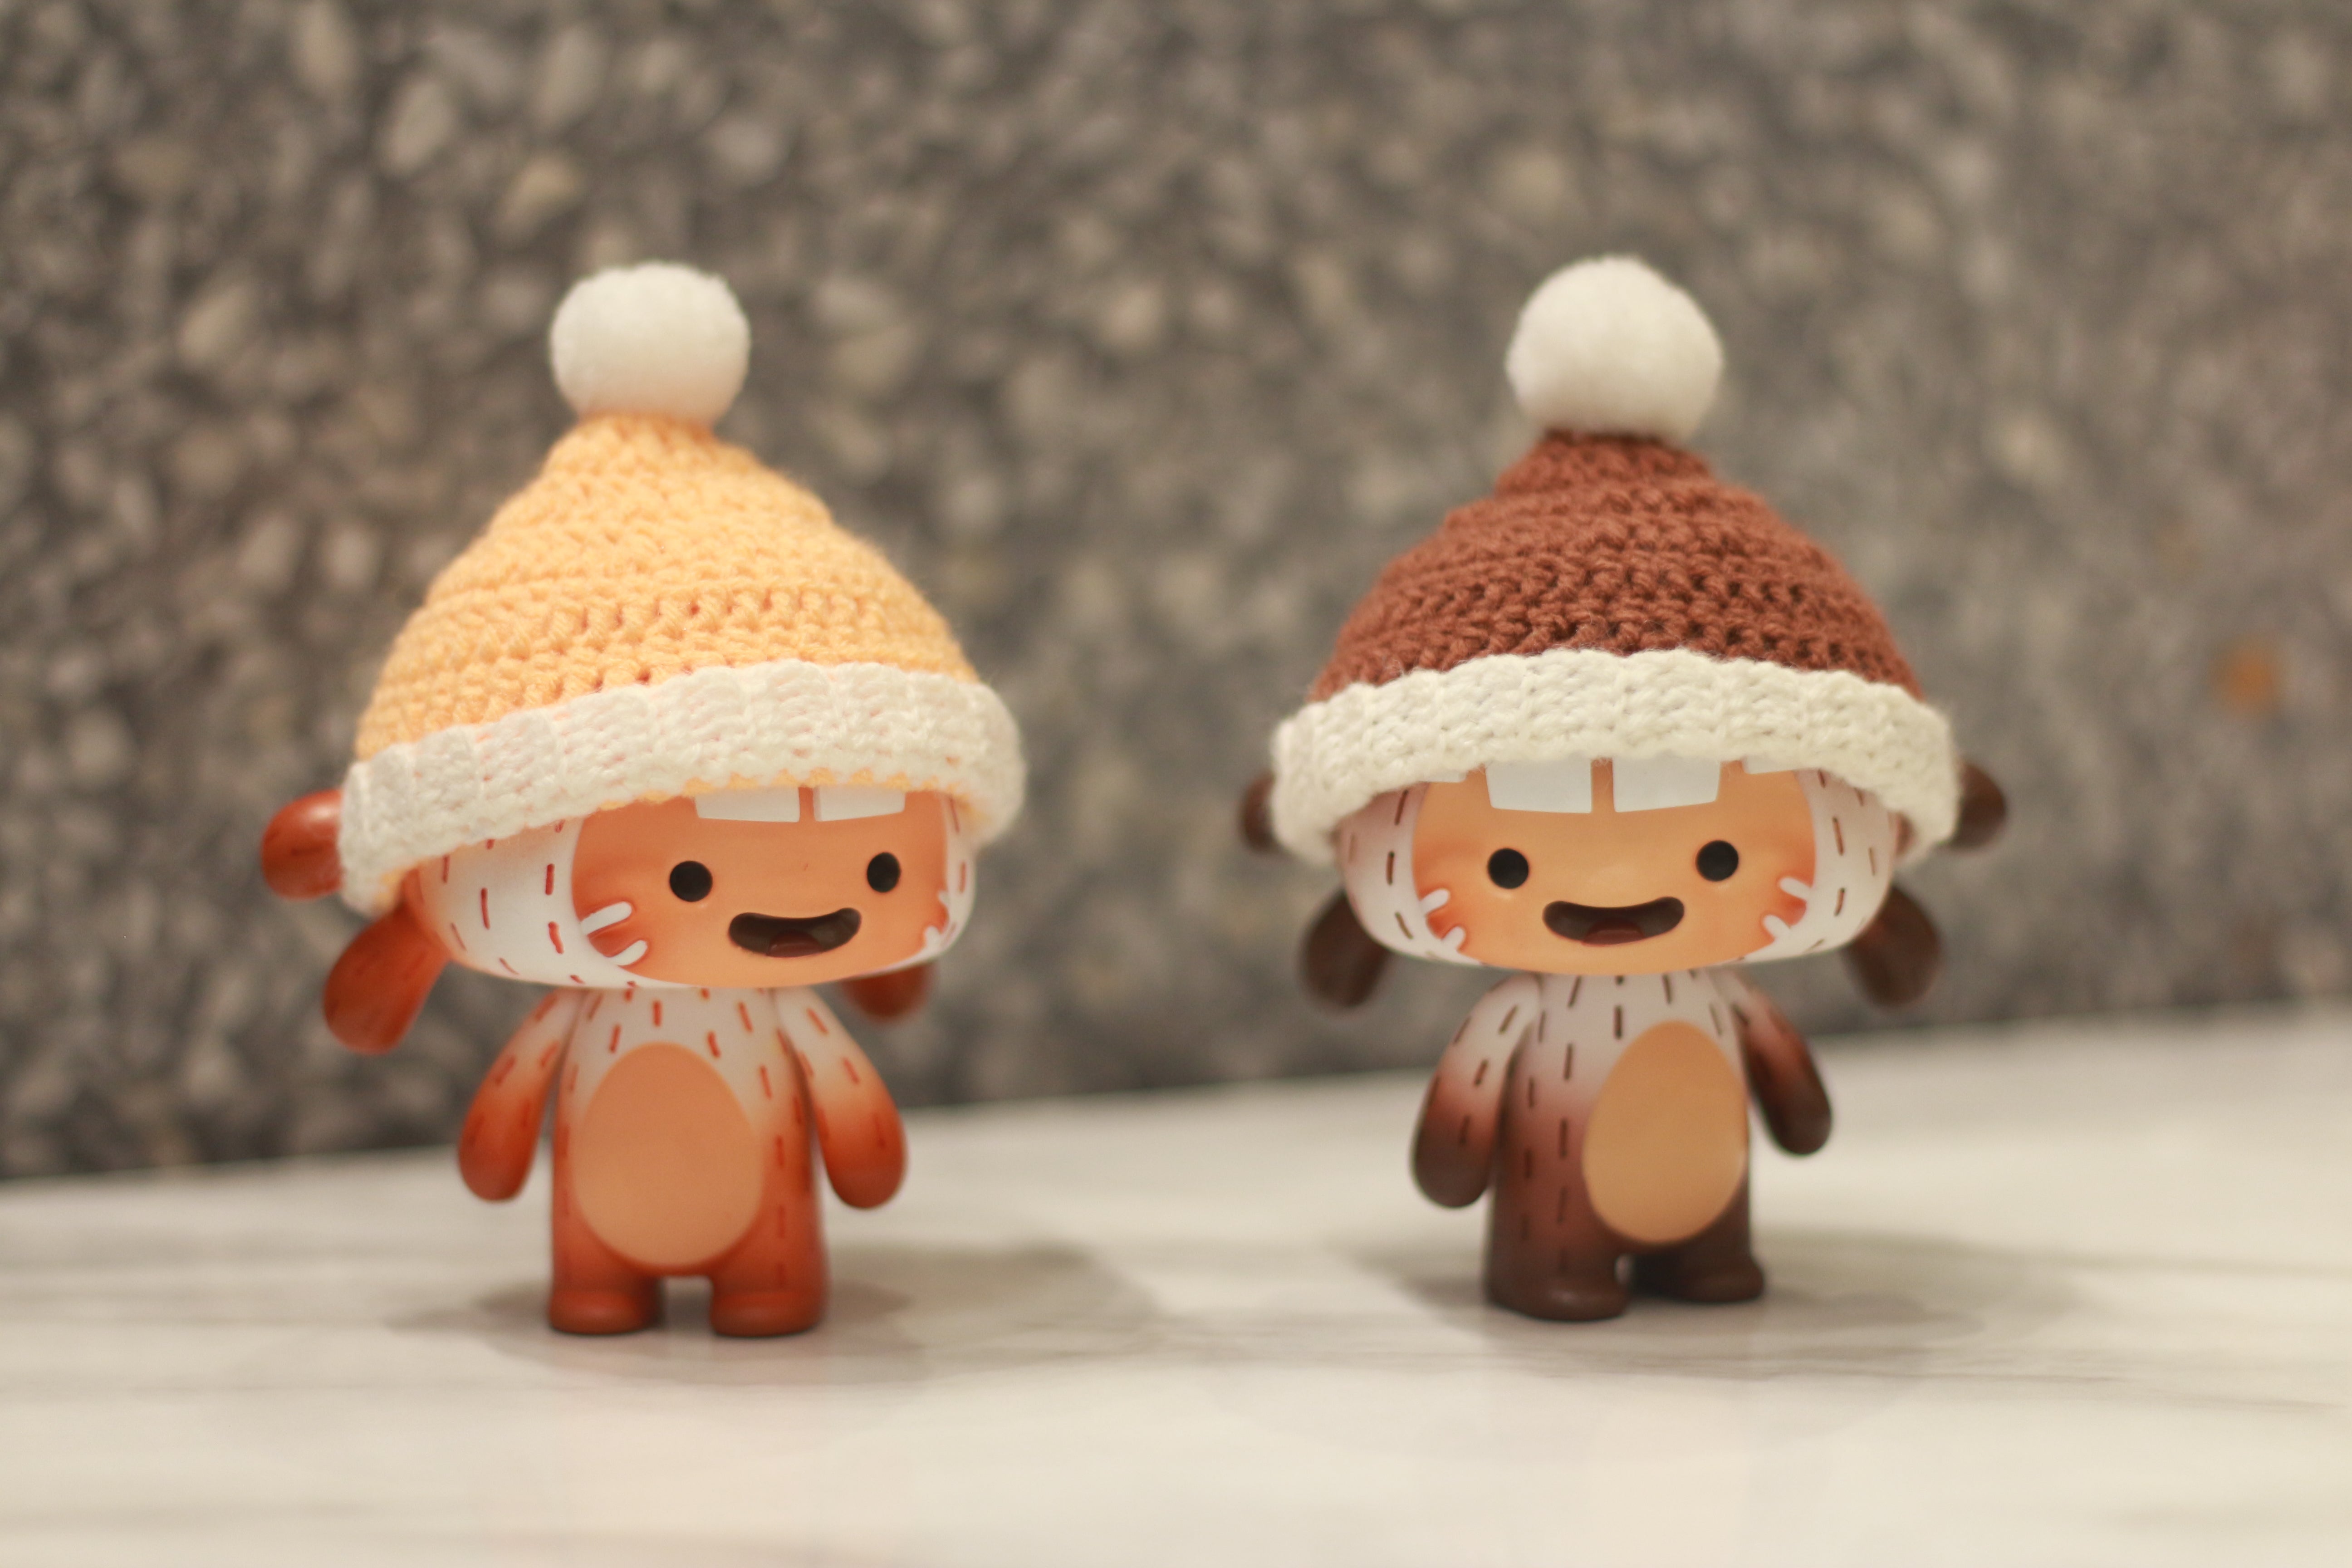 Two small toy figurines with knit hats, part of Bakumba Yeti Orange & Brown collection by Bakumba.